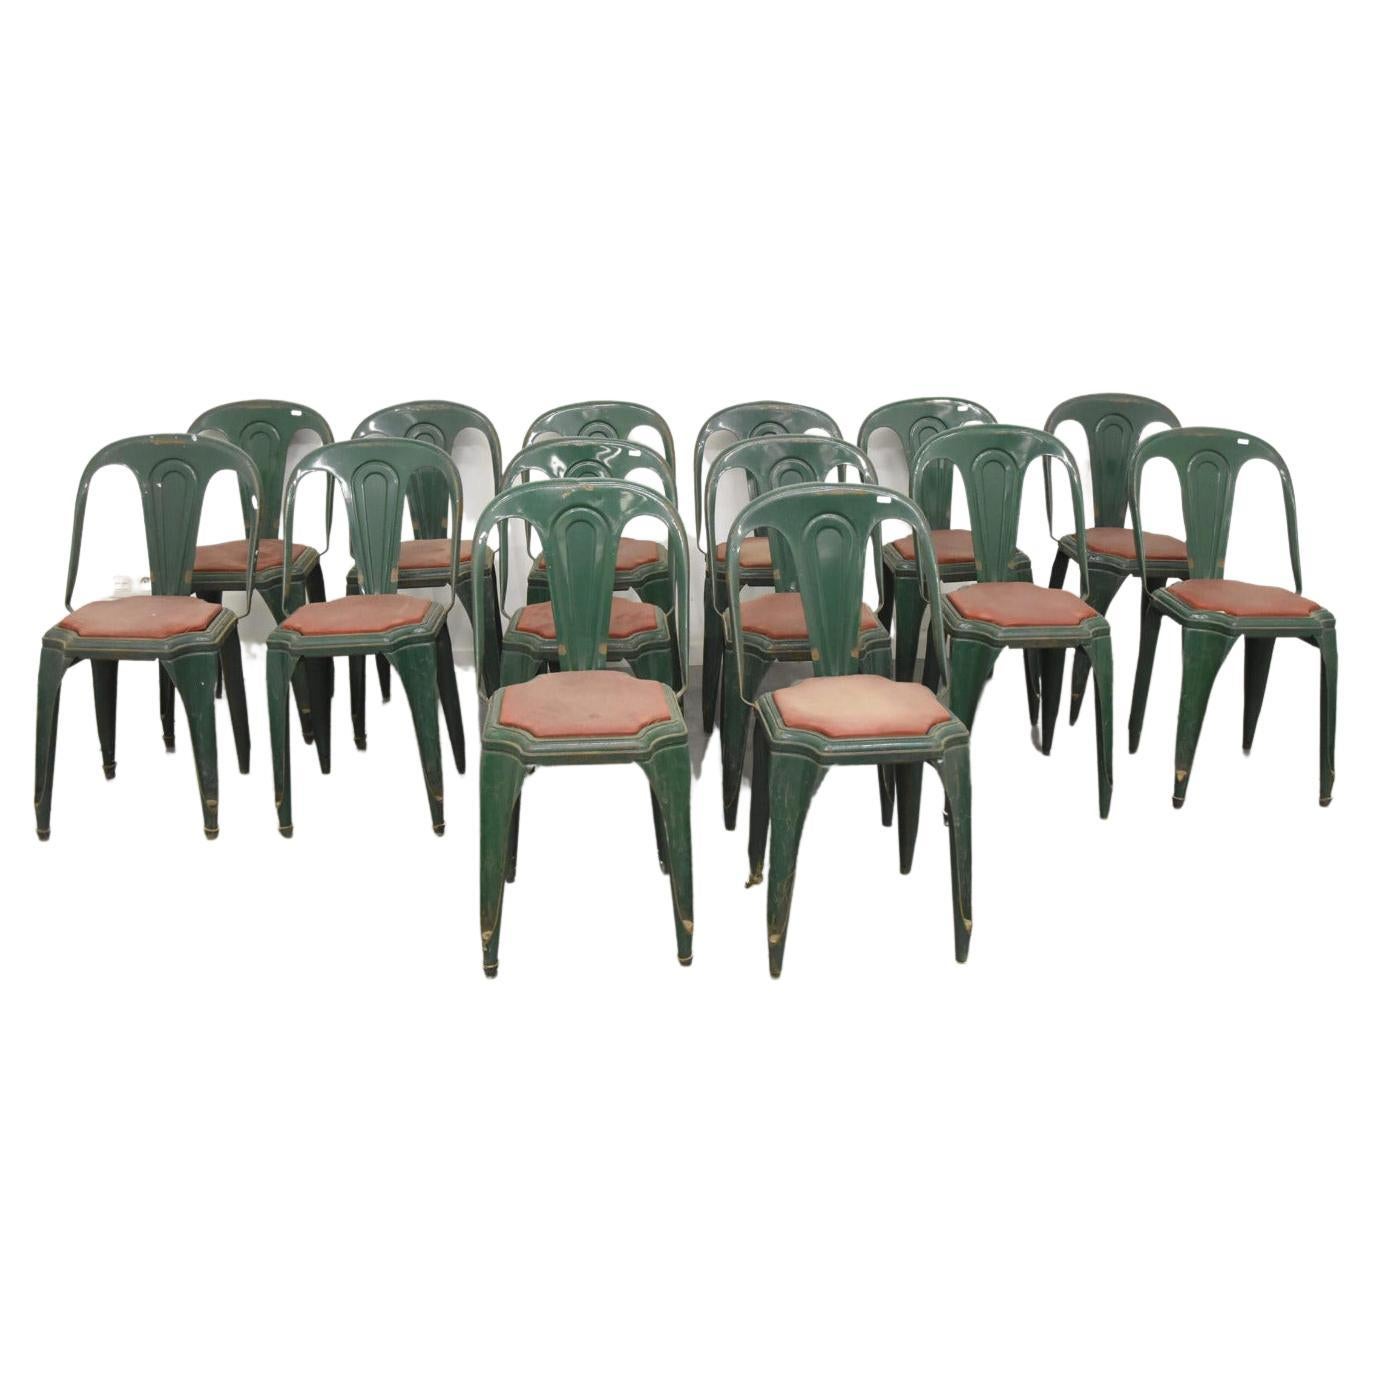 Suite of 14 Industrial Chairs of the Fibrocit Brand, circa 1950